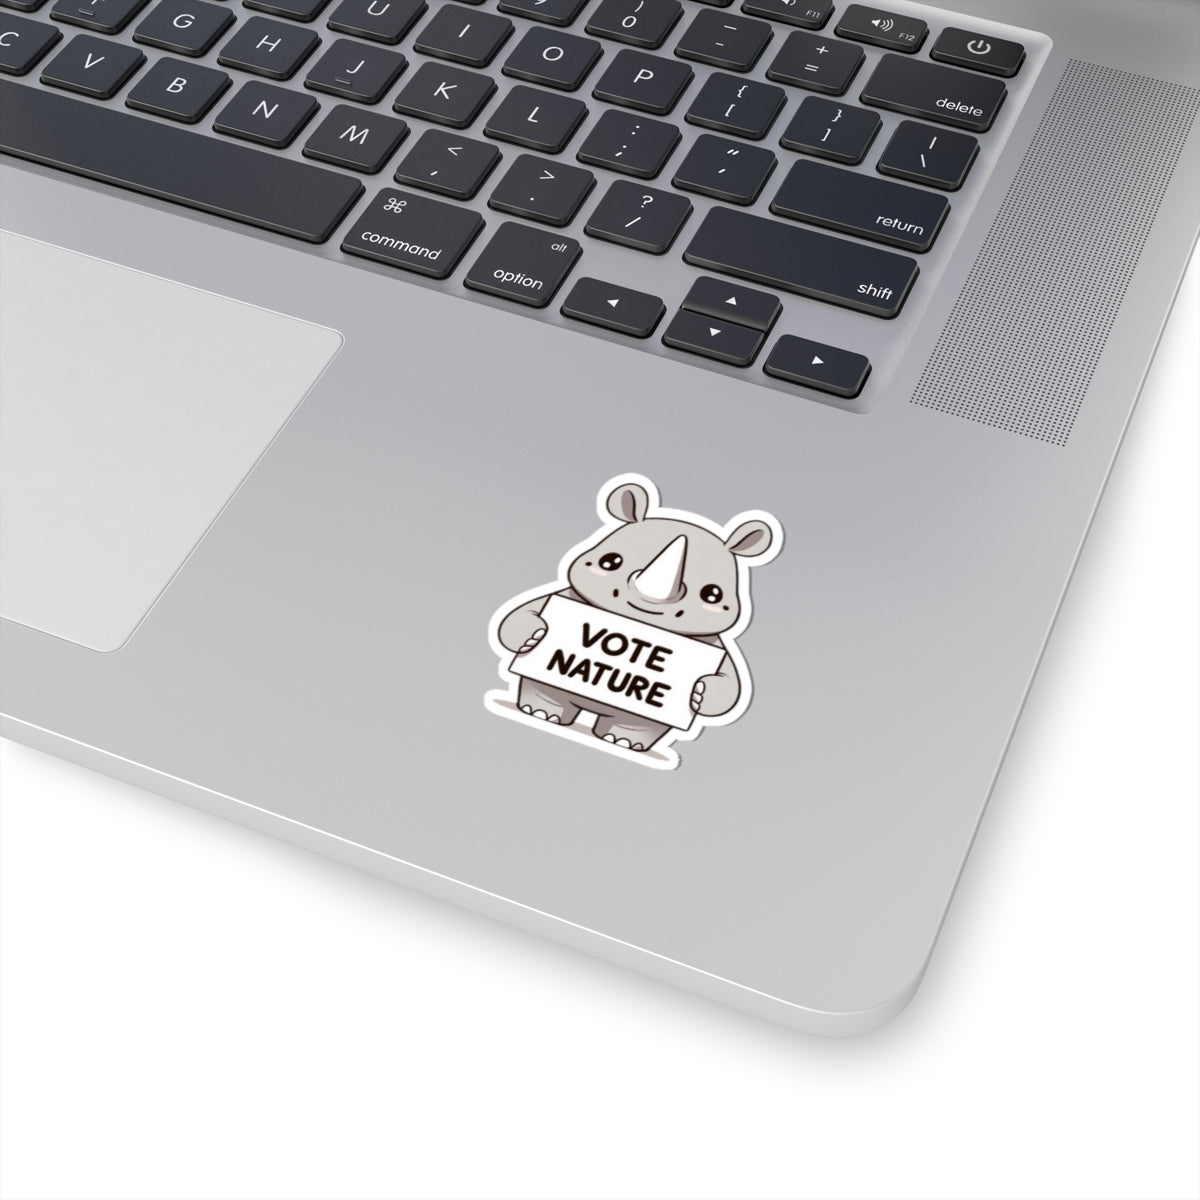 Inspirational Cute Rhino Statement vinyl Sticker: Vote Nature! for laptop, kindle, phone, ipad, instrument case, notebook, mood board